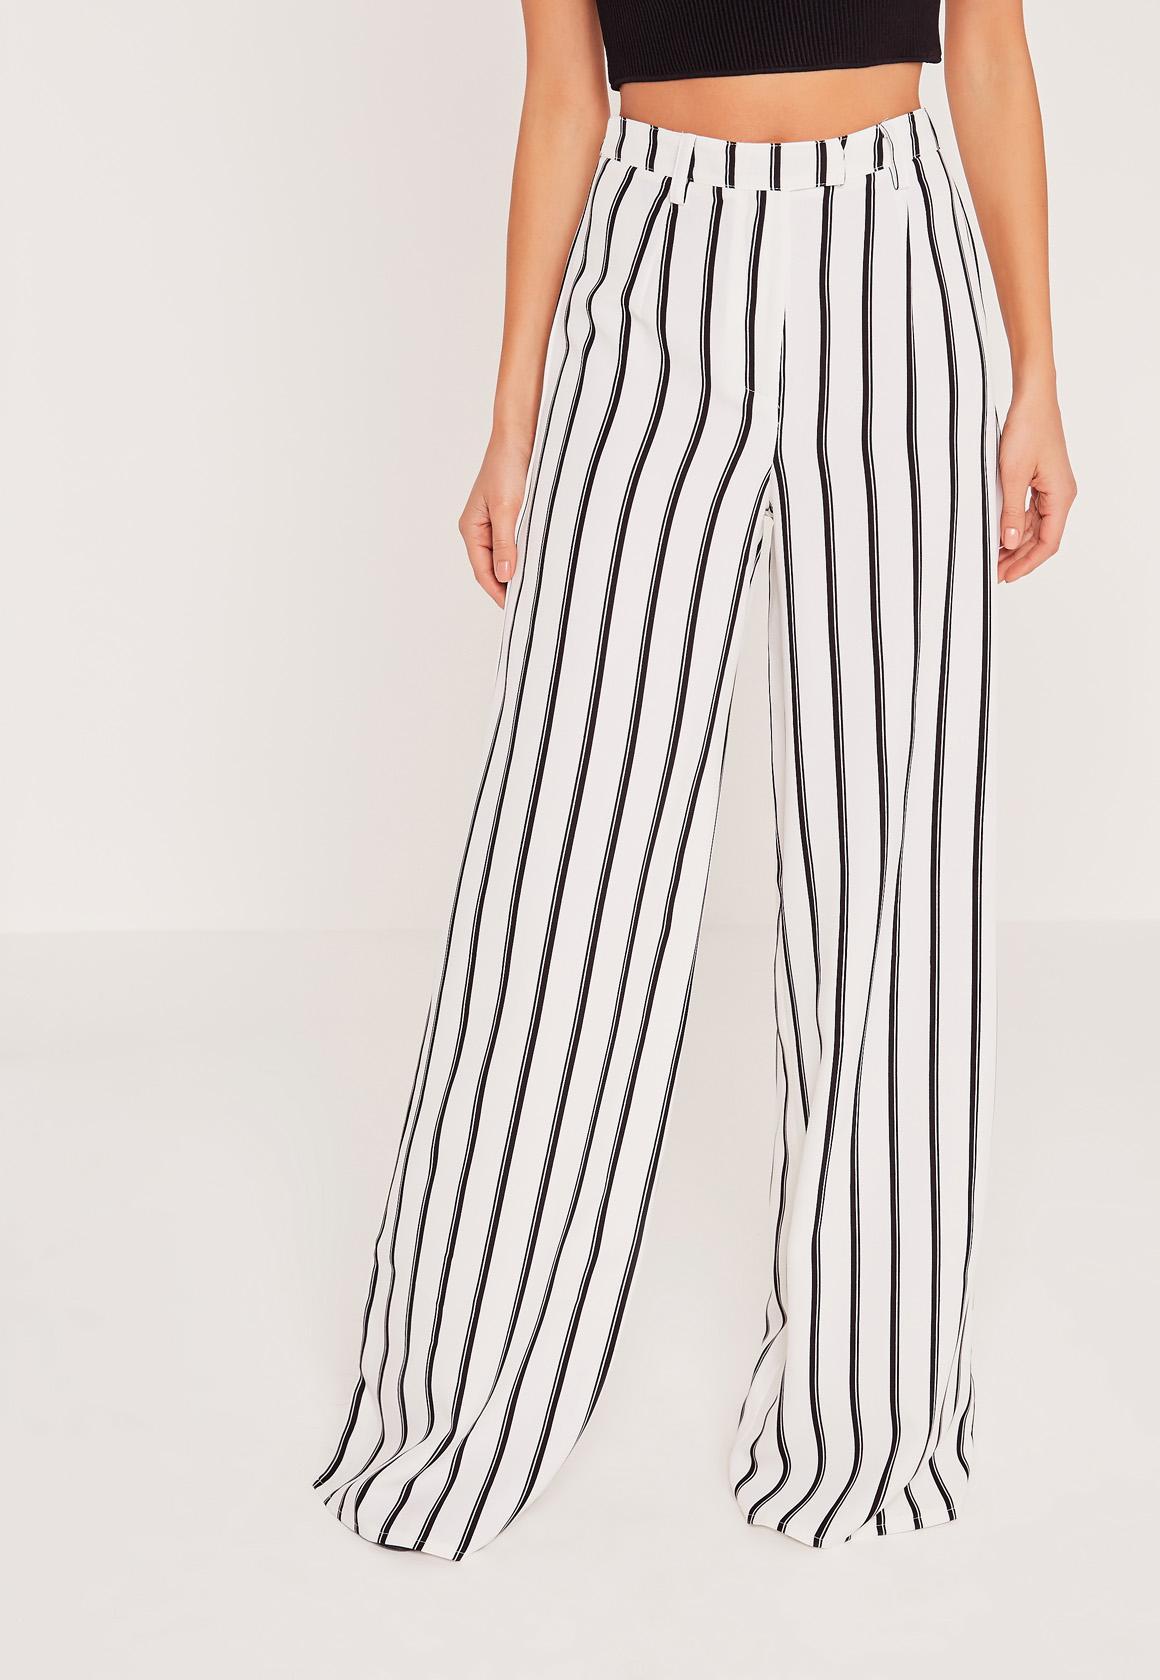 Missguided Tall Exclusive Striped Wide Leg Pants White in White - Lyst